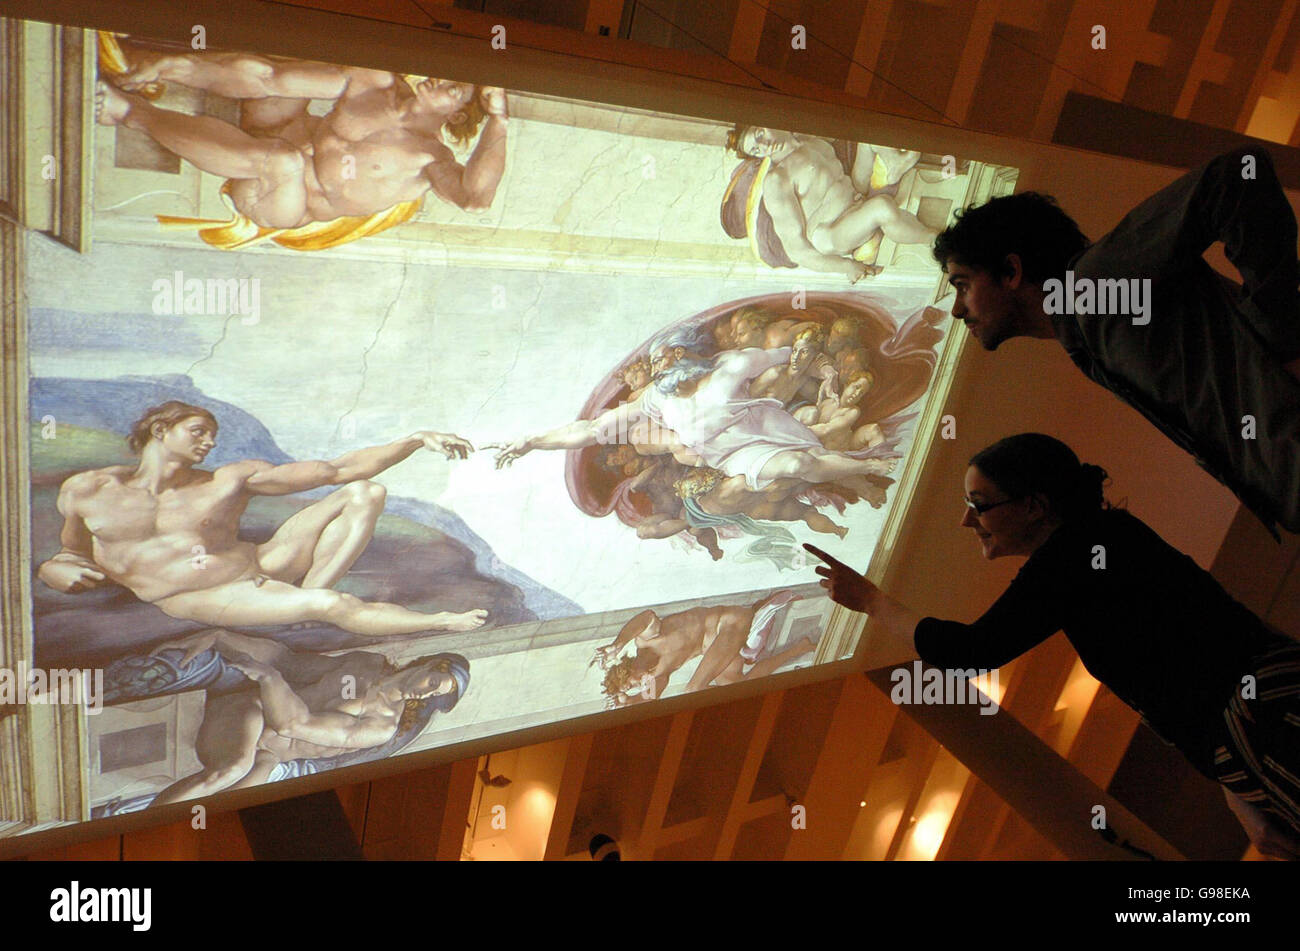 Staff at the British Museum view an illuminated ceiling showing the 'Creation of Adam' by the Renaissance artist Michelangelo at an exhibition called 'Closer To The Master'. The exhibition is being previewed at the museum, Monday March 20, 2006, prior to its opening on Thursday. It's museum's first showing of the artist's works for thirty years. PRESS ASSOCIATION Photo. Photo credit should read: Ian Nicholson/PA Stock Photo